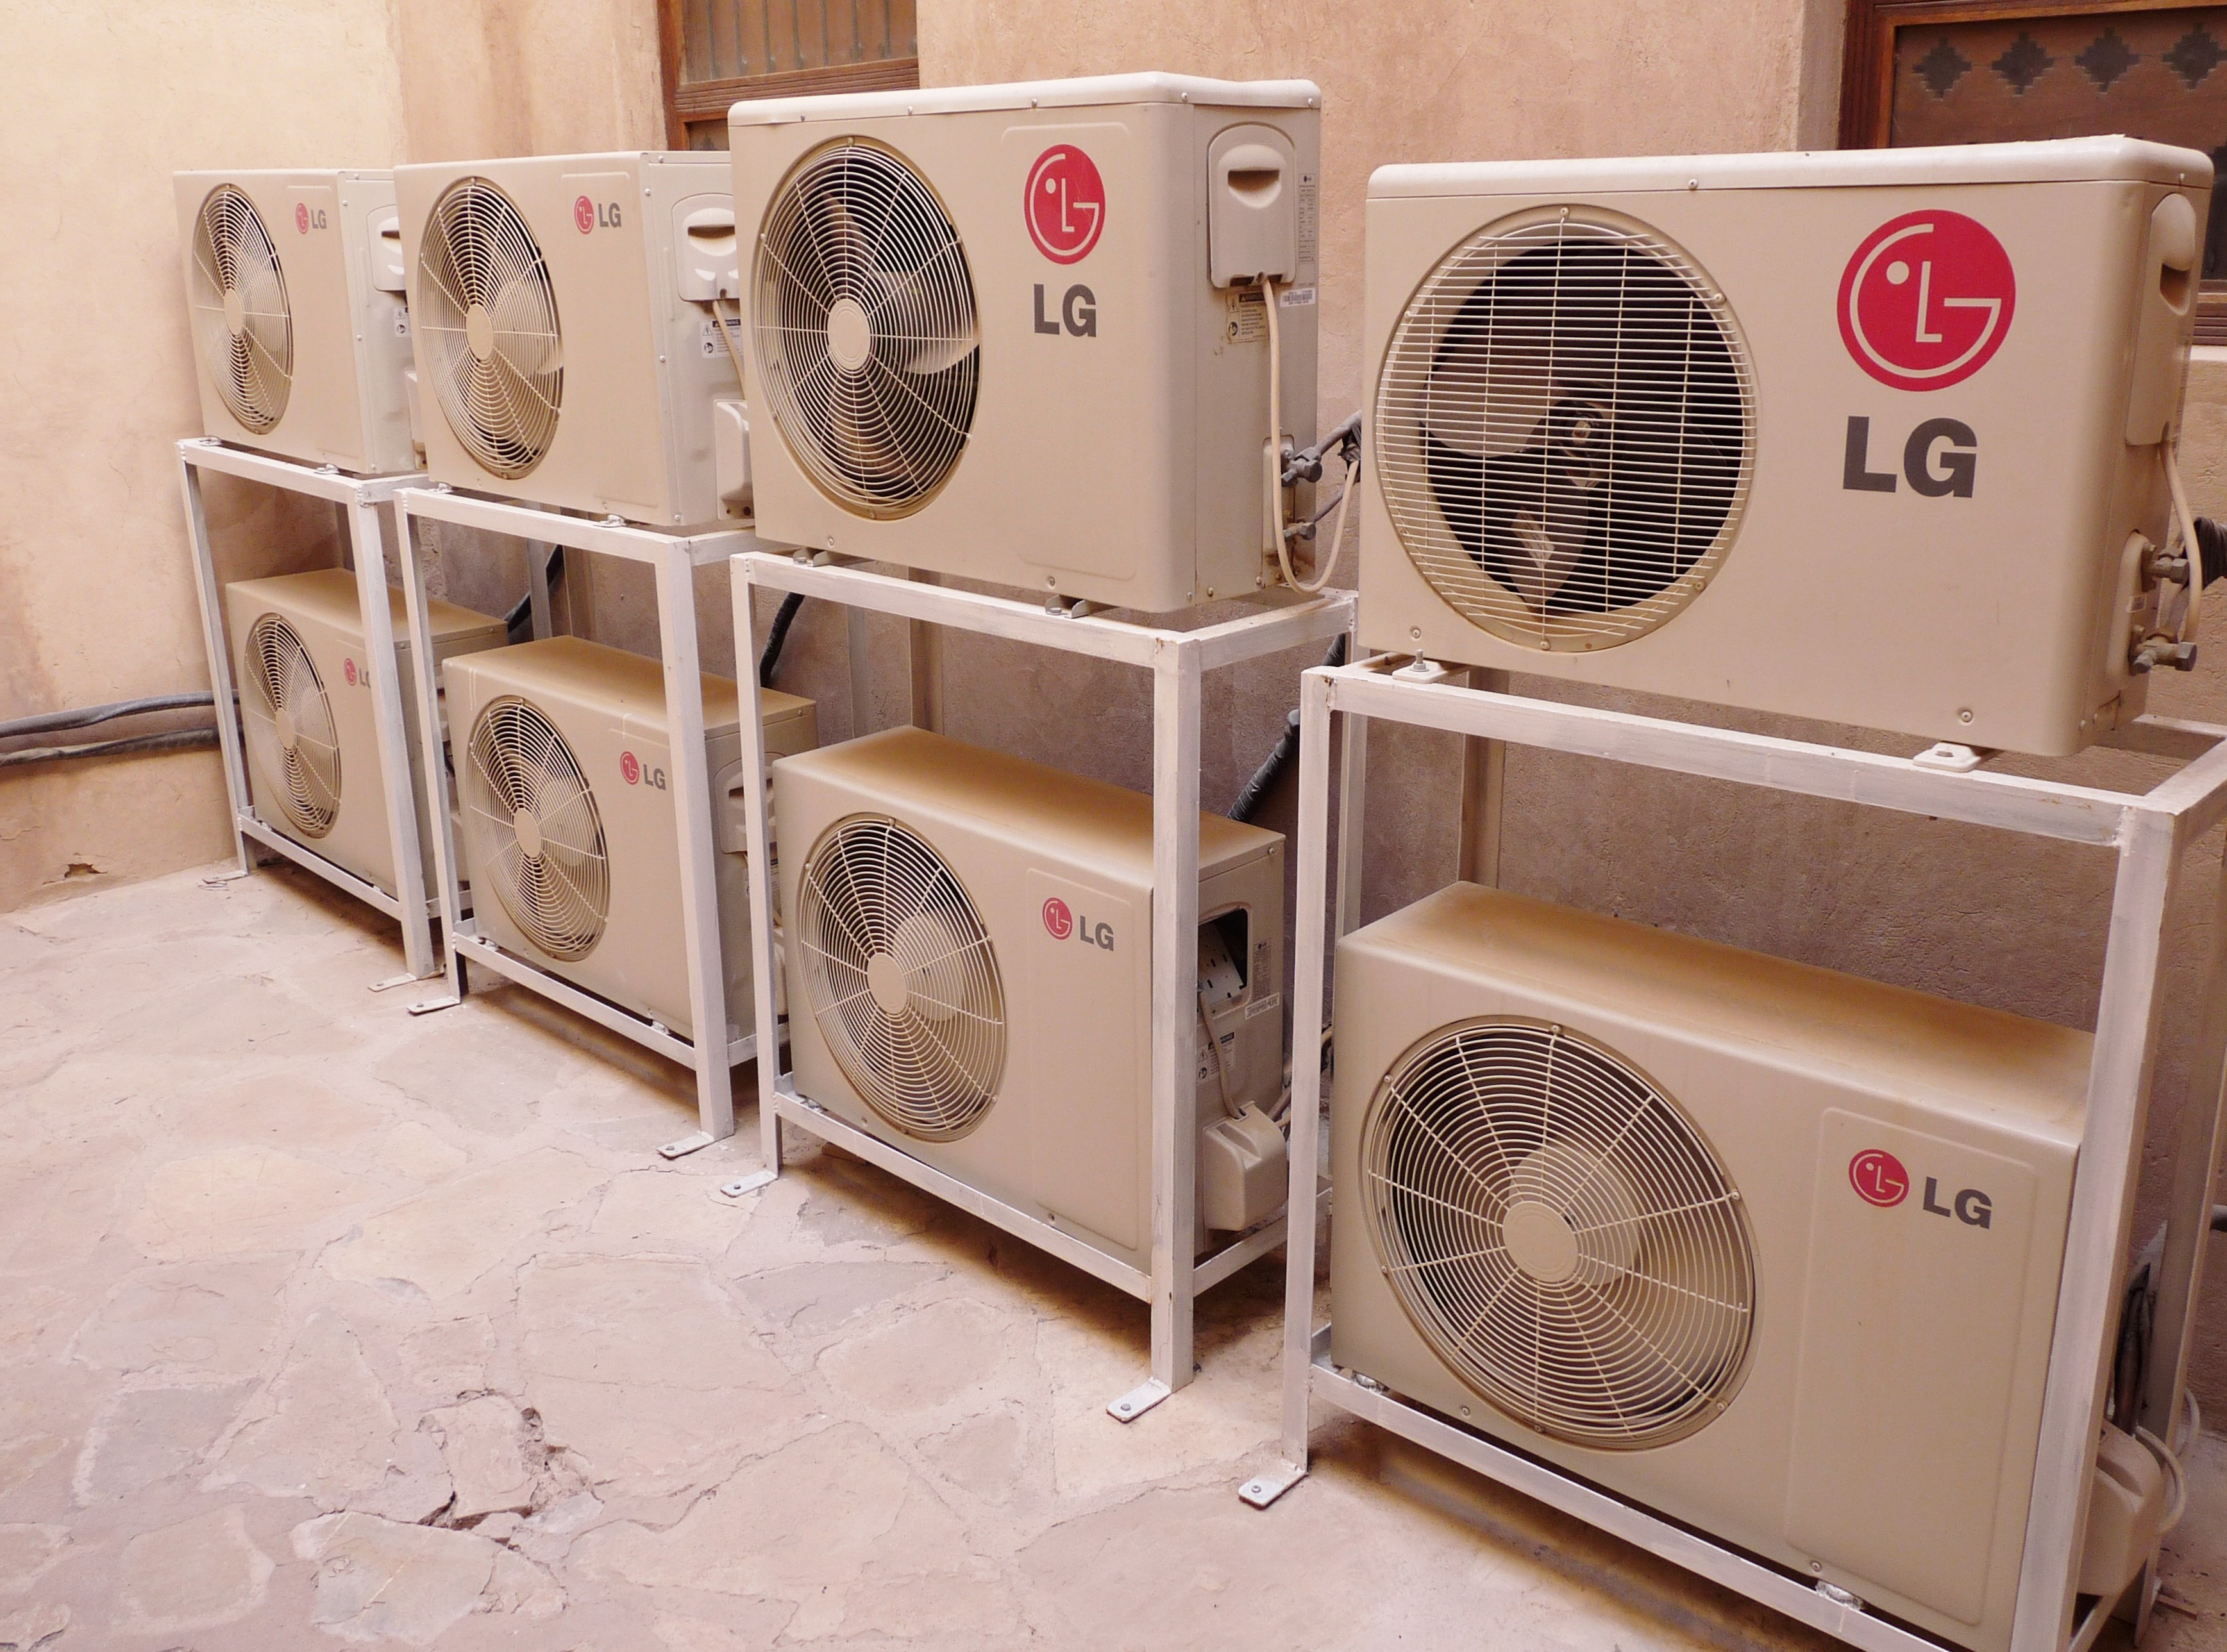 eight LG air condensers, air conditioning, ventilation, fan, technology